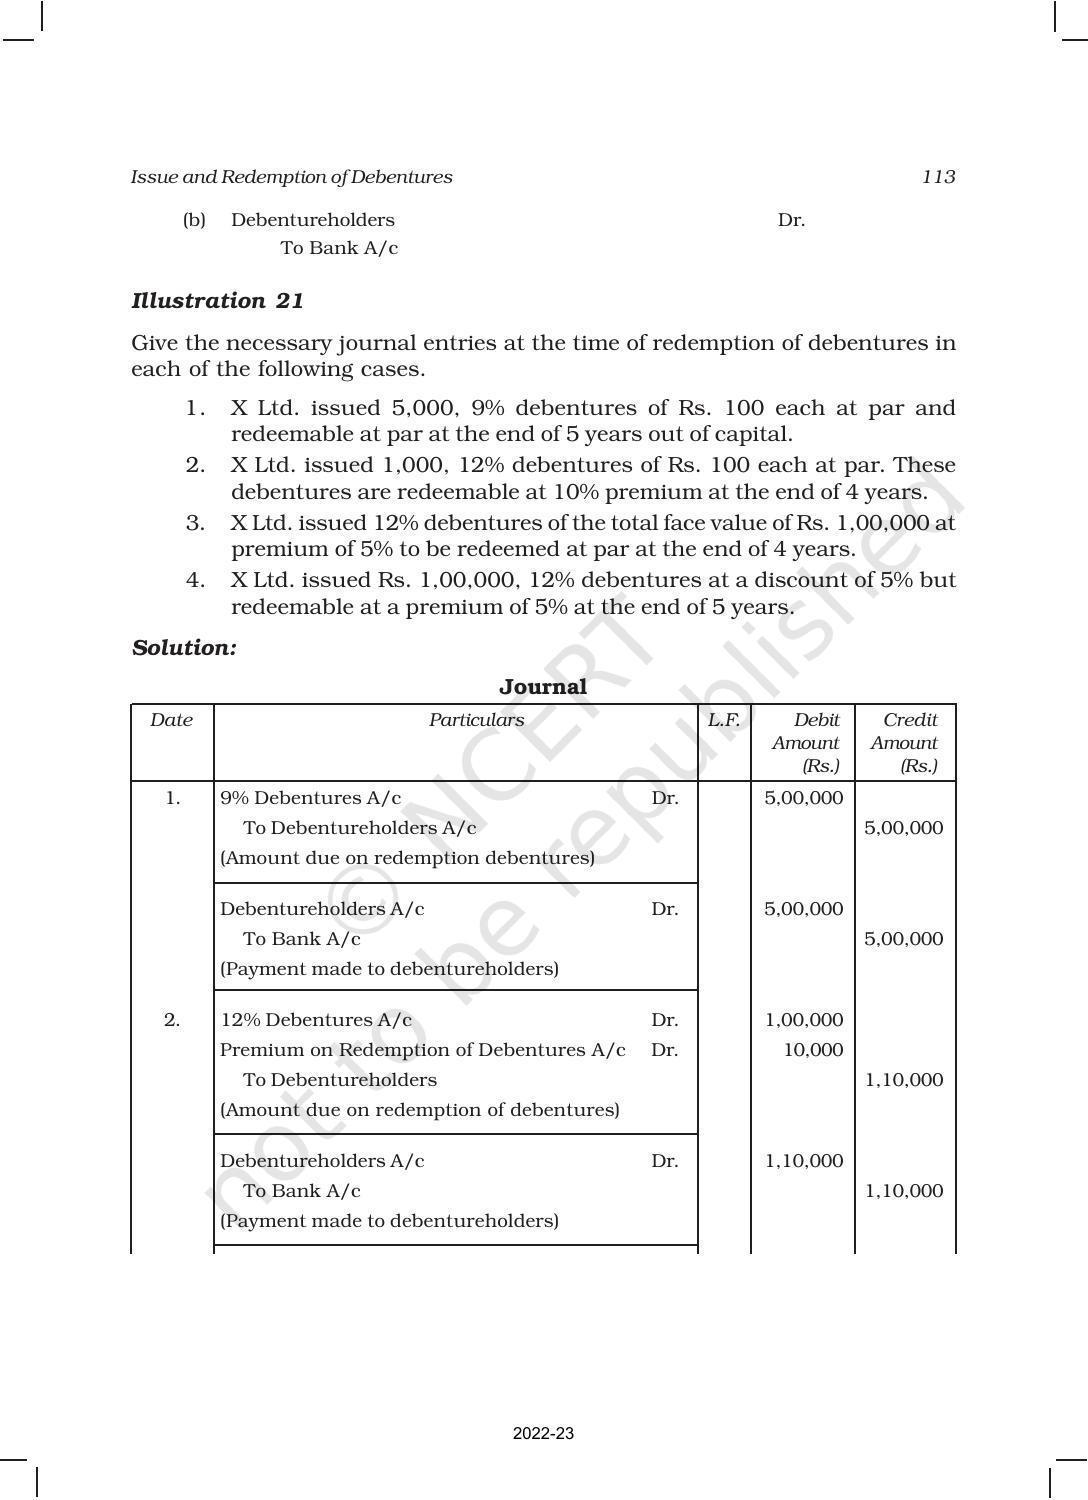 NCERT Book for Class 12 Accountancy Part II Chapter 1 Issue and Redemption of Debentures - Page 39